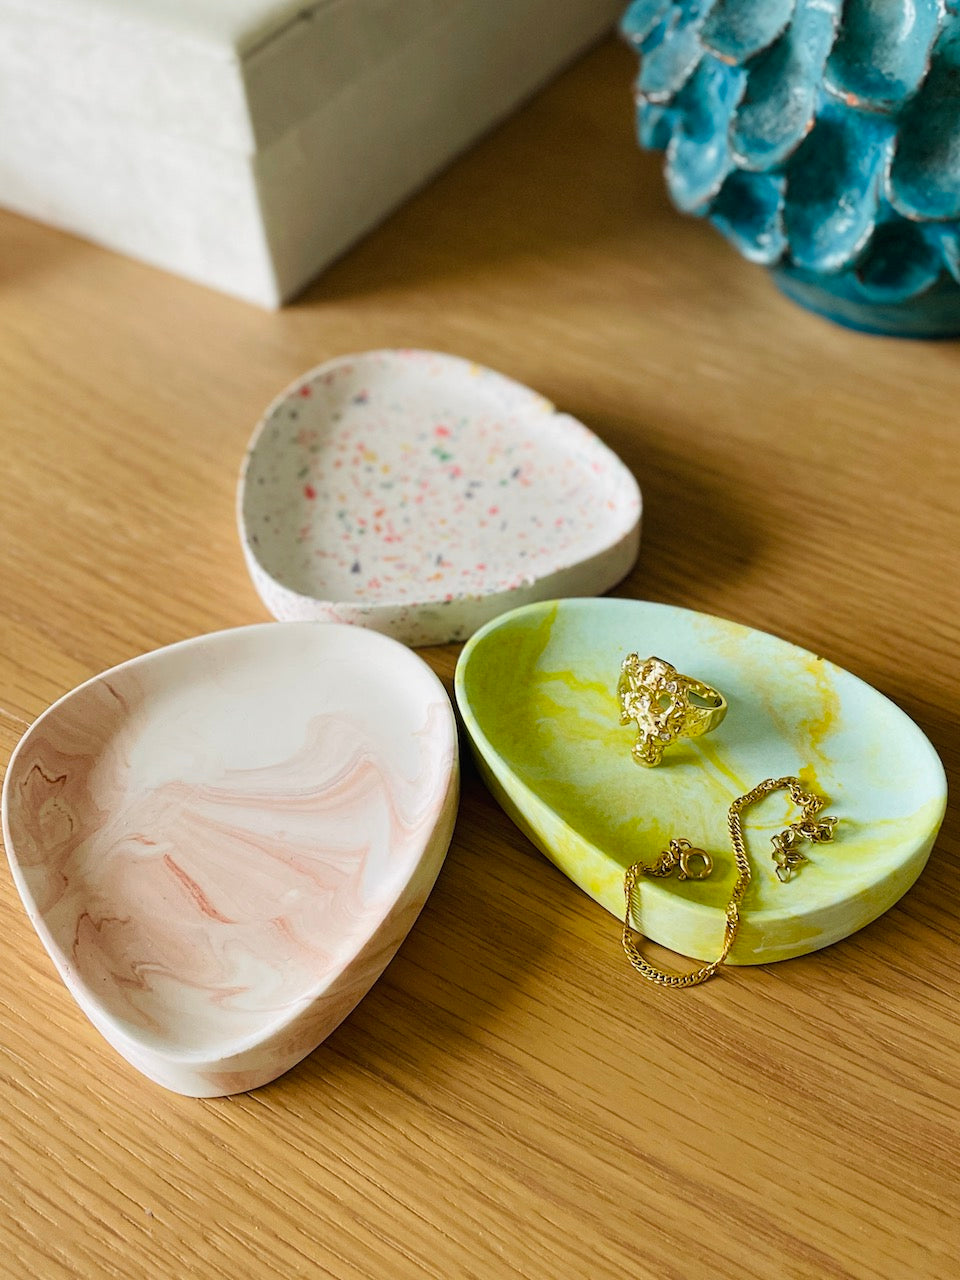 LUXURY Create at Home Kit - Jewelry bowls